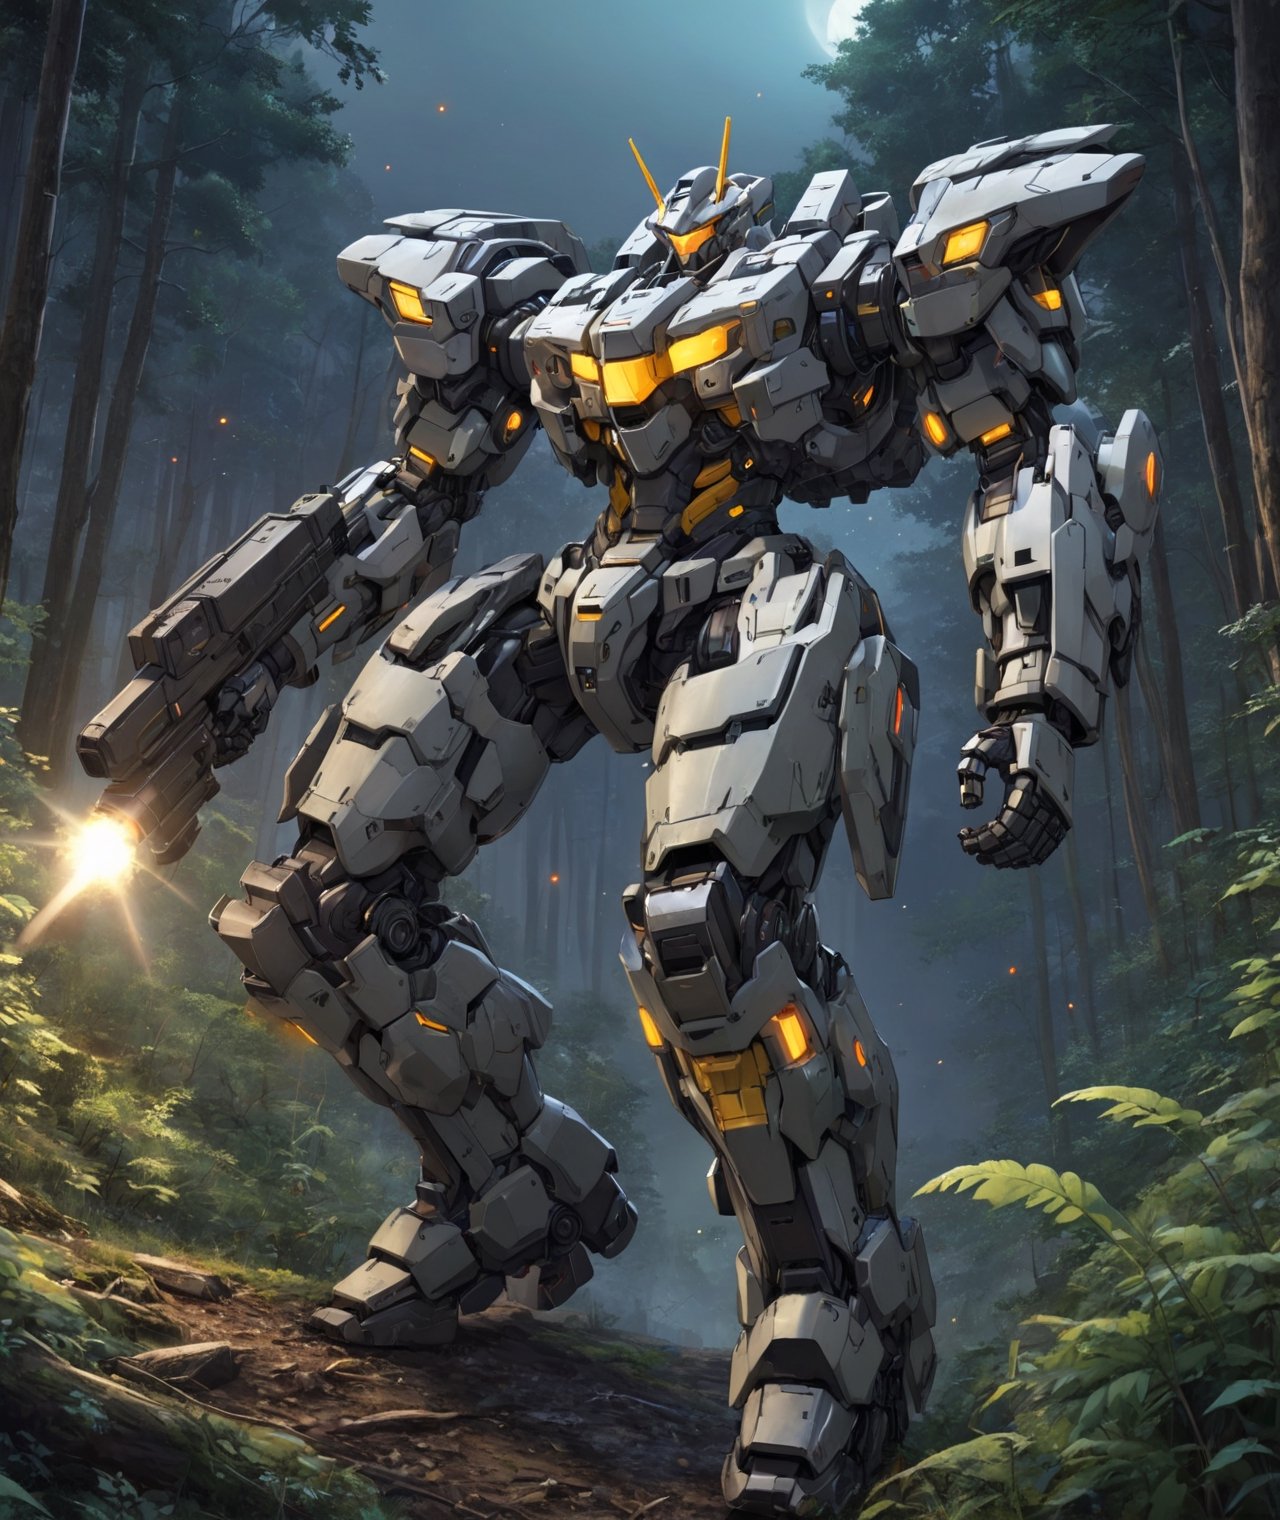 anime style, futuristic mech armor power suit in a forest at nighttime, moving on a hillside, dynamic angle, more detail XL,armored core